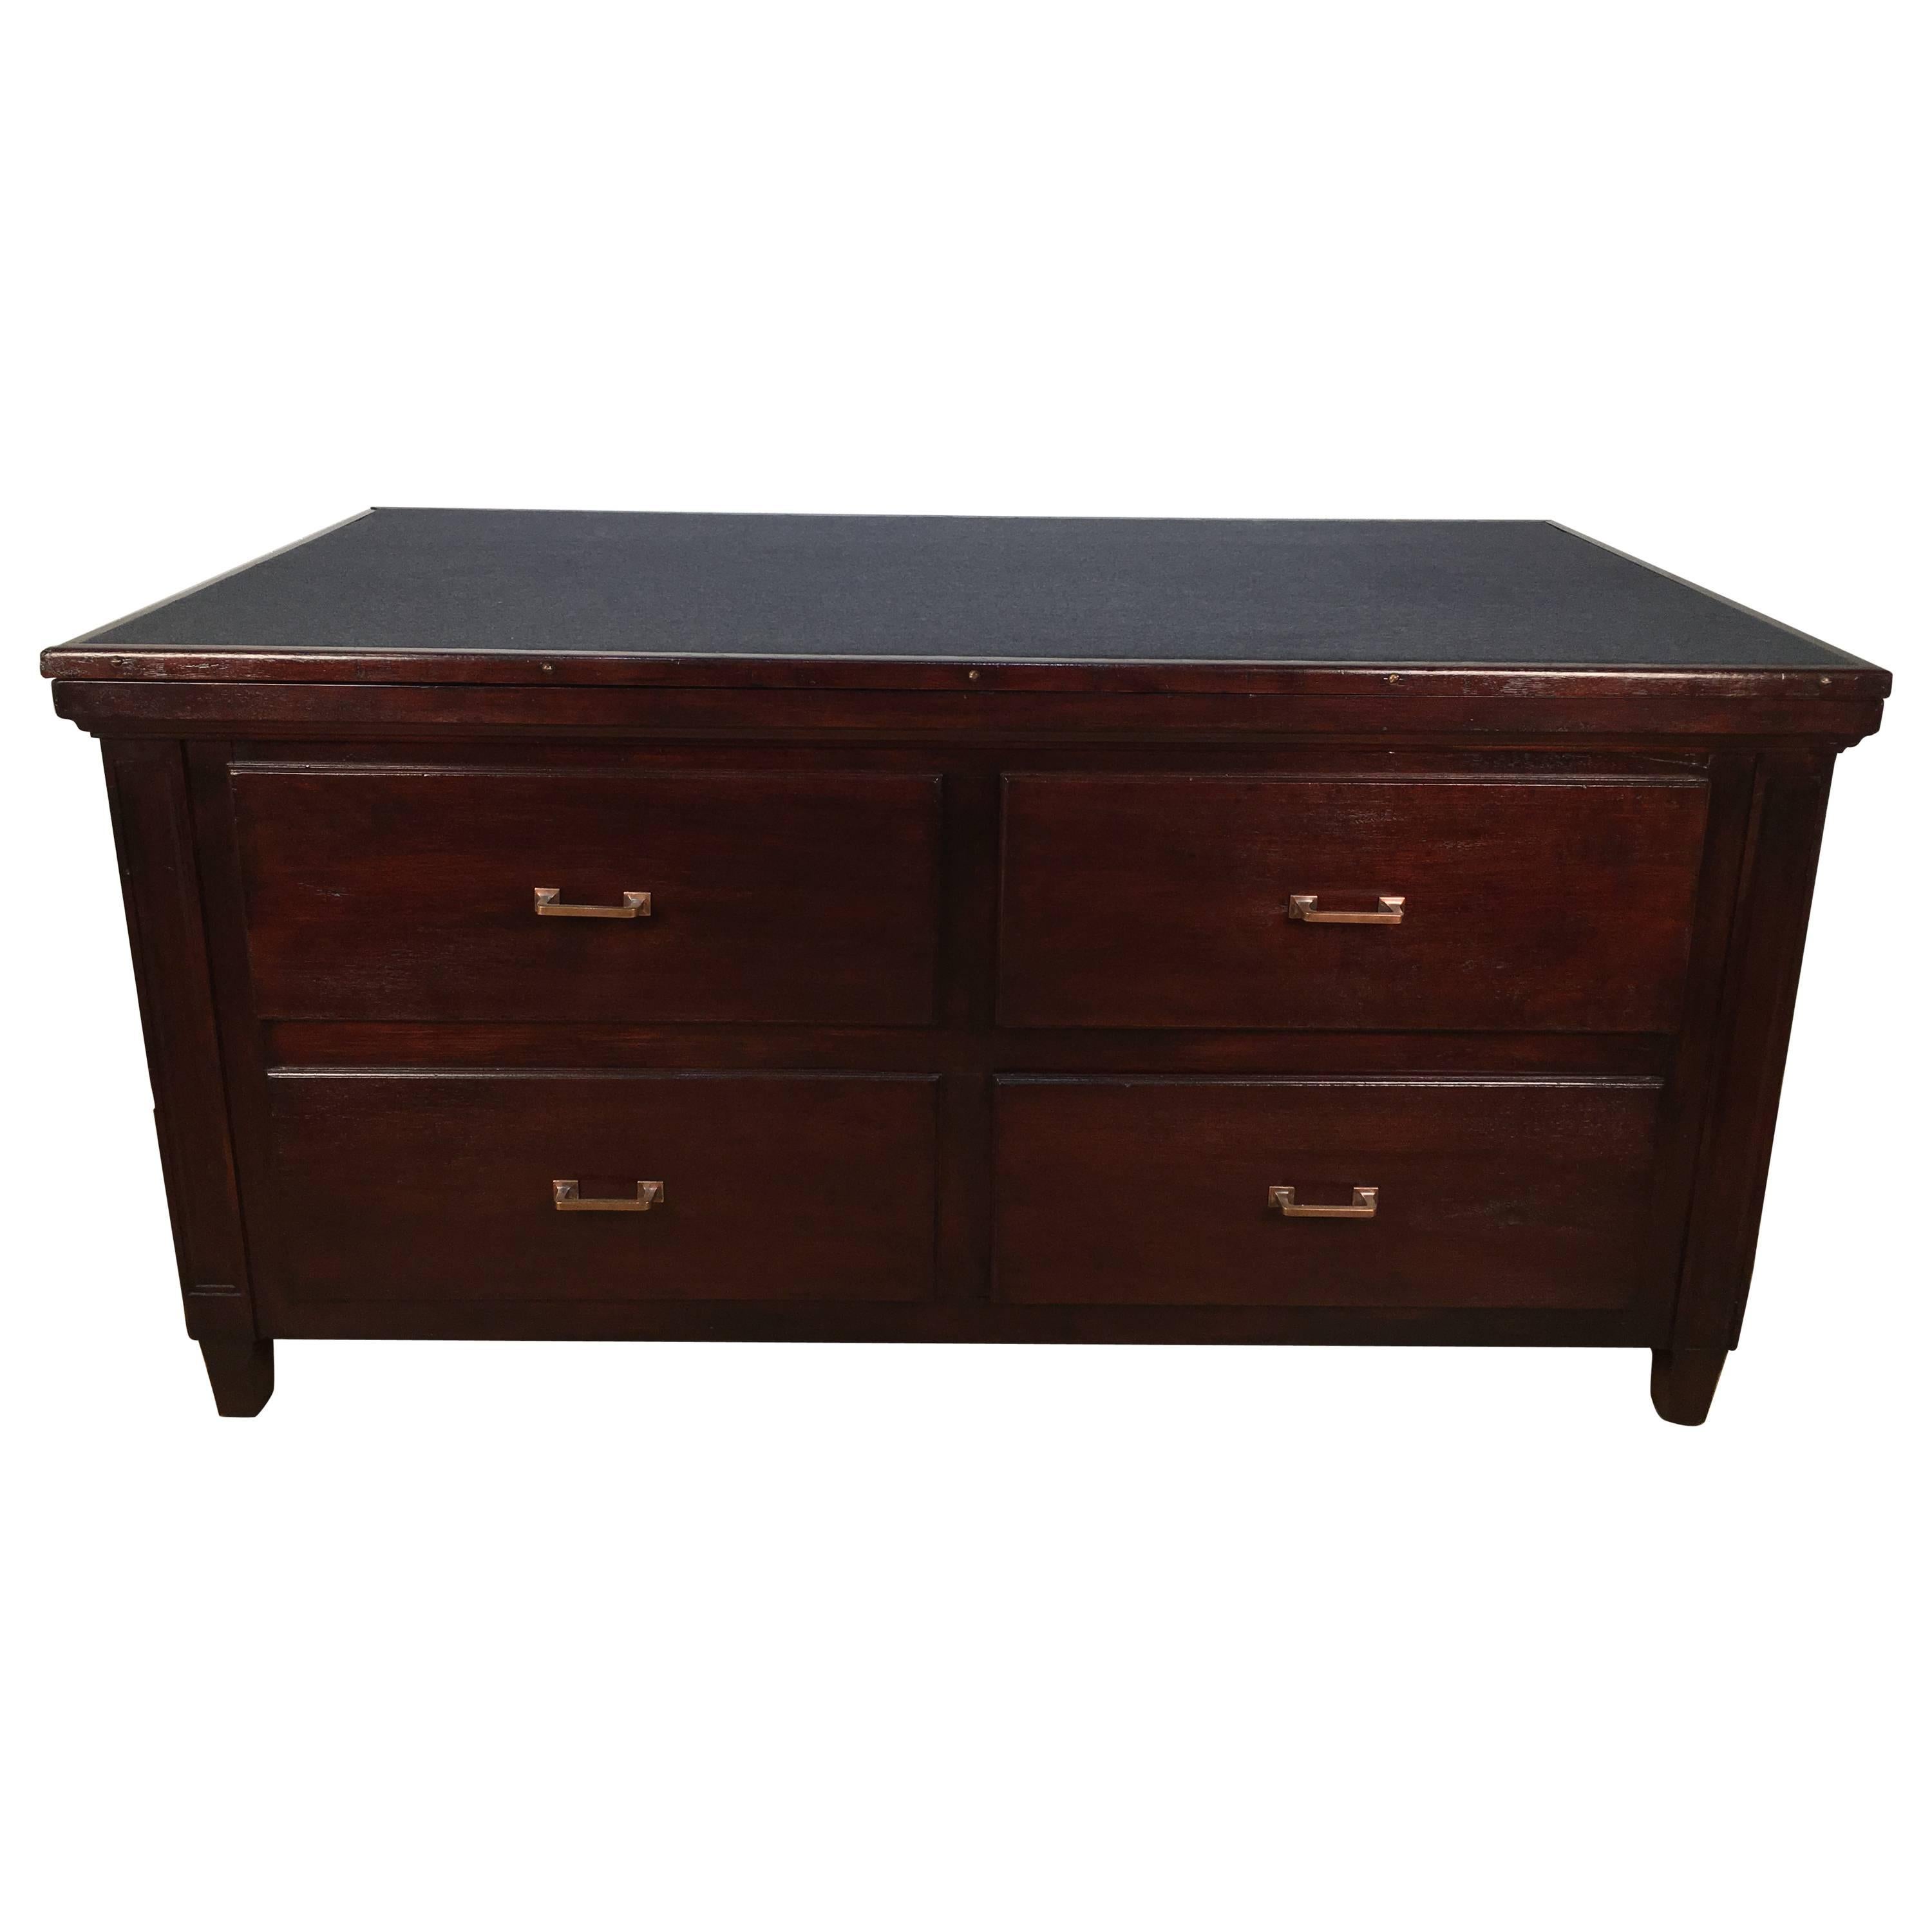 Antique drafting desk or store fixture, The adjustable tilt-top with dark grey inset fabric. Possibly could have been in a mercantile store, used for fabric sales or the like. One side has four deep drawers and opposite side has an upper drawer and